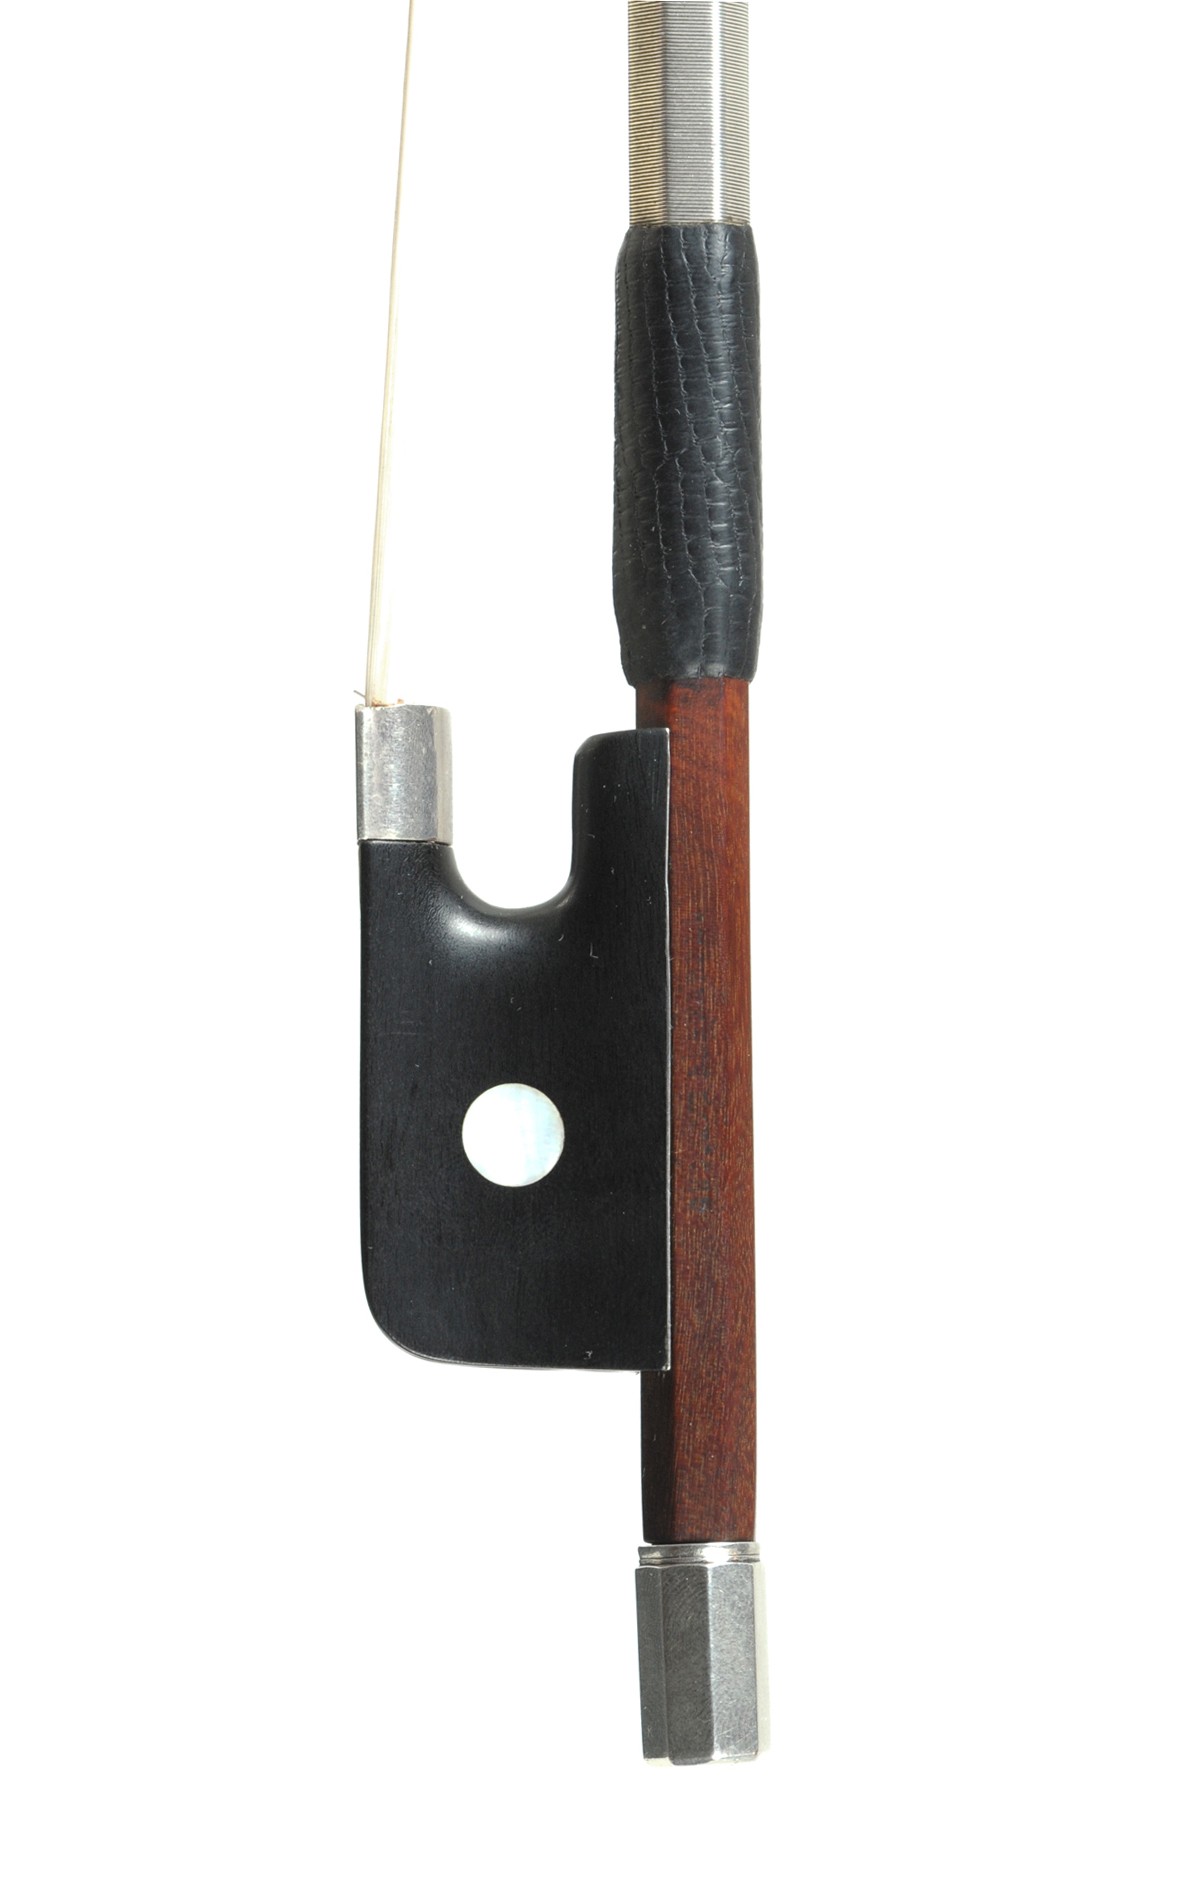 Cello bow by Charles Louis Bazin